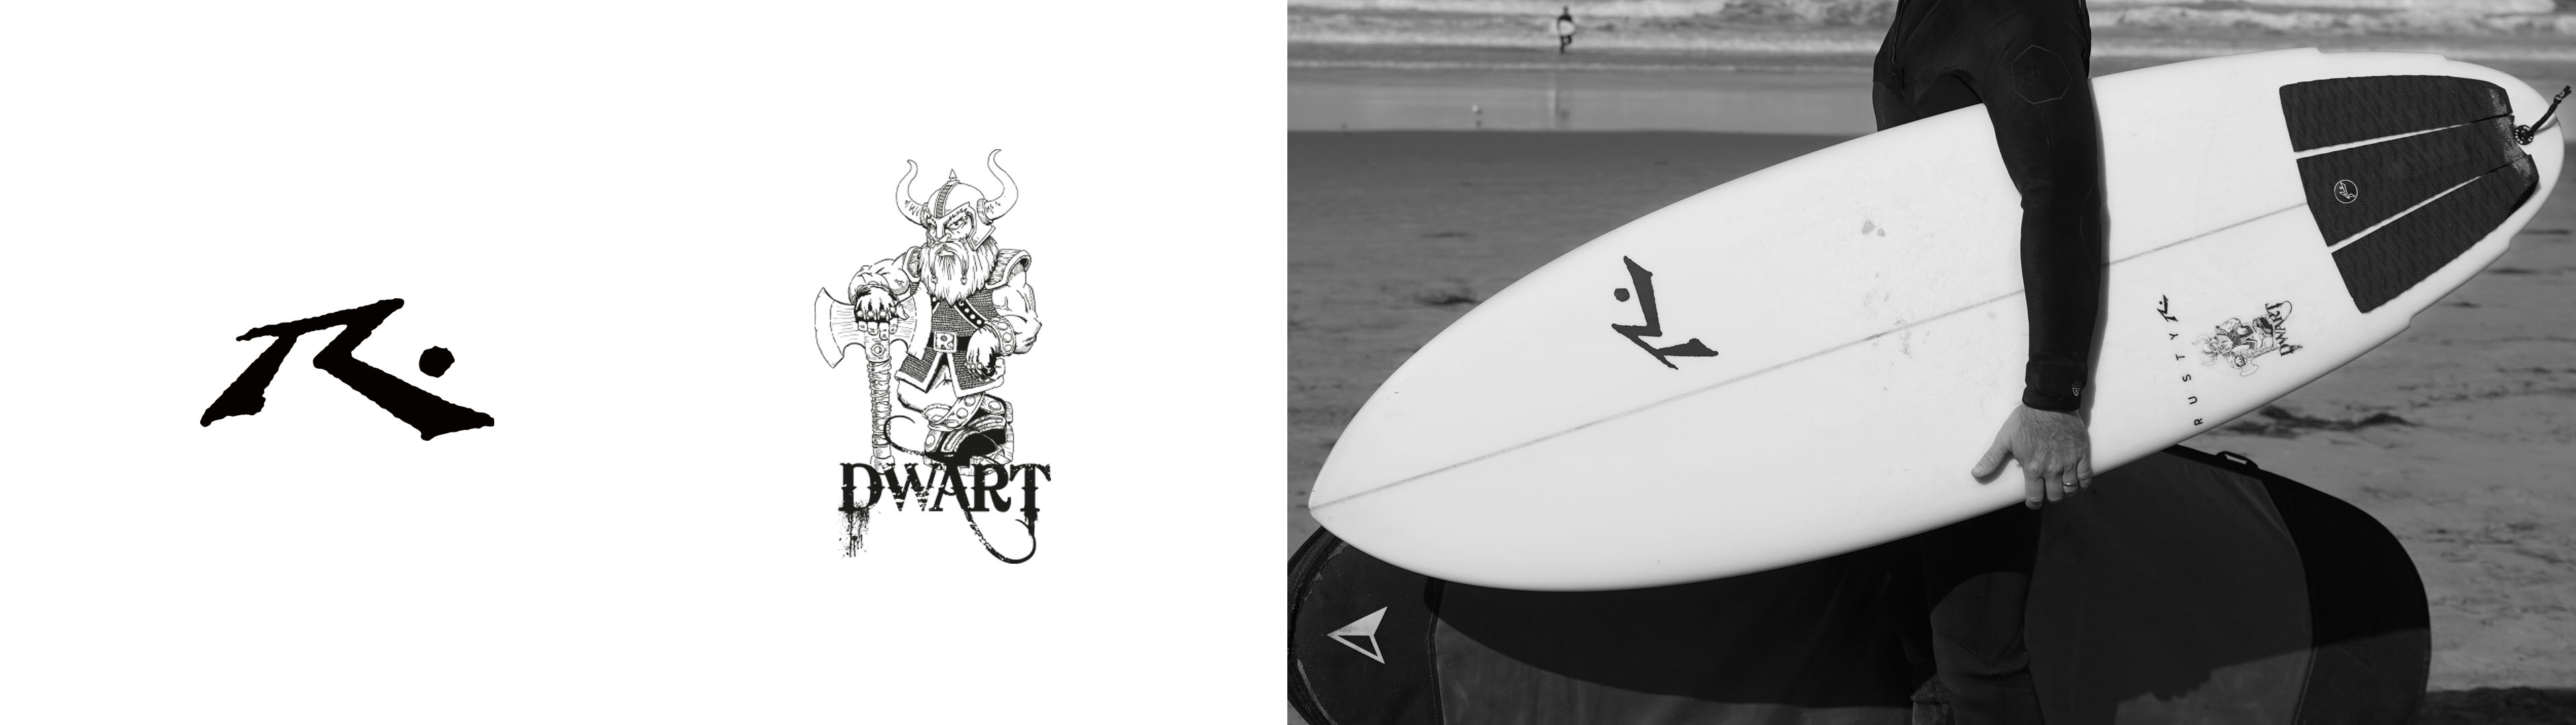 RUSTY DWART Shortboard surfboard in ACT and TEC  Header